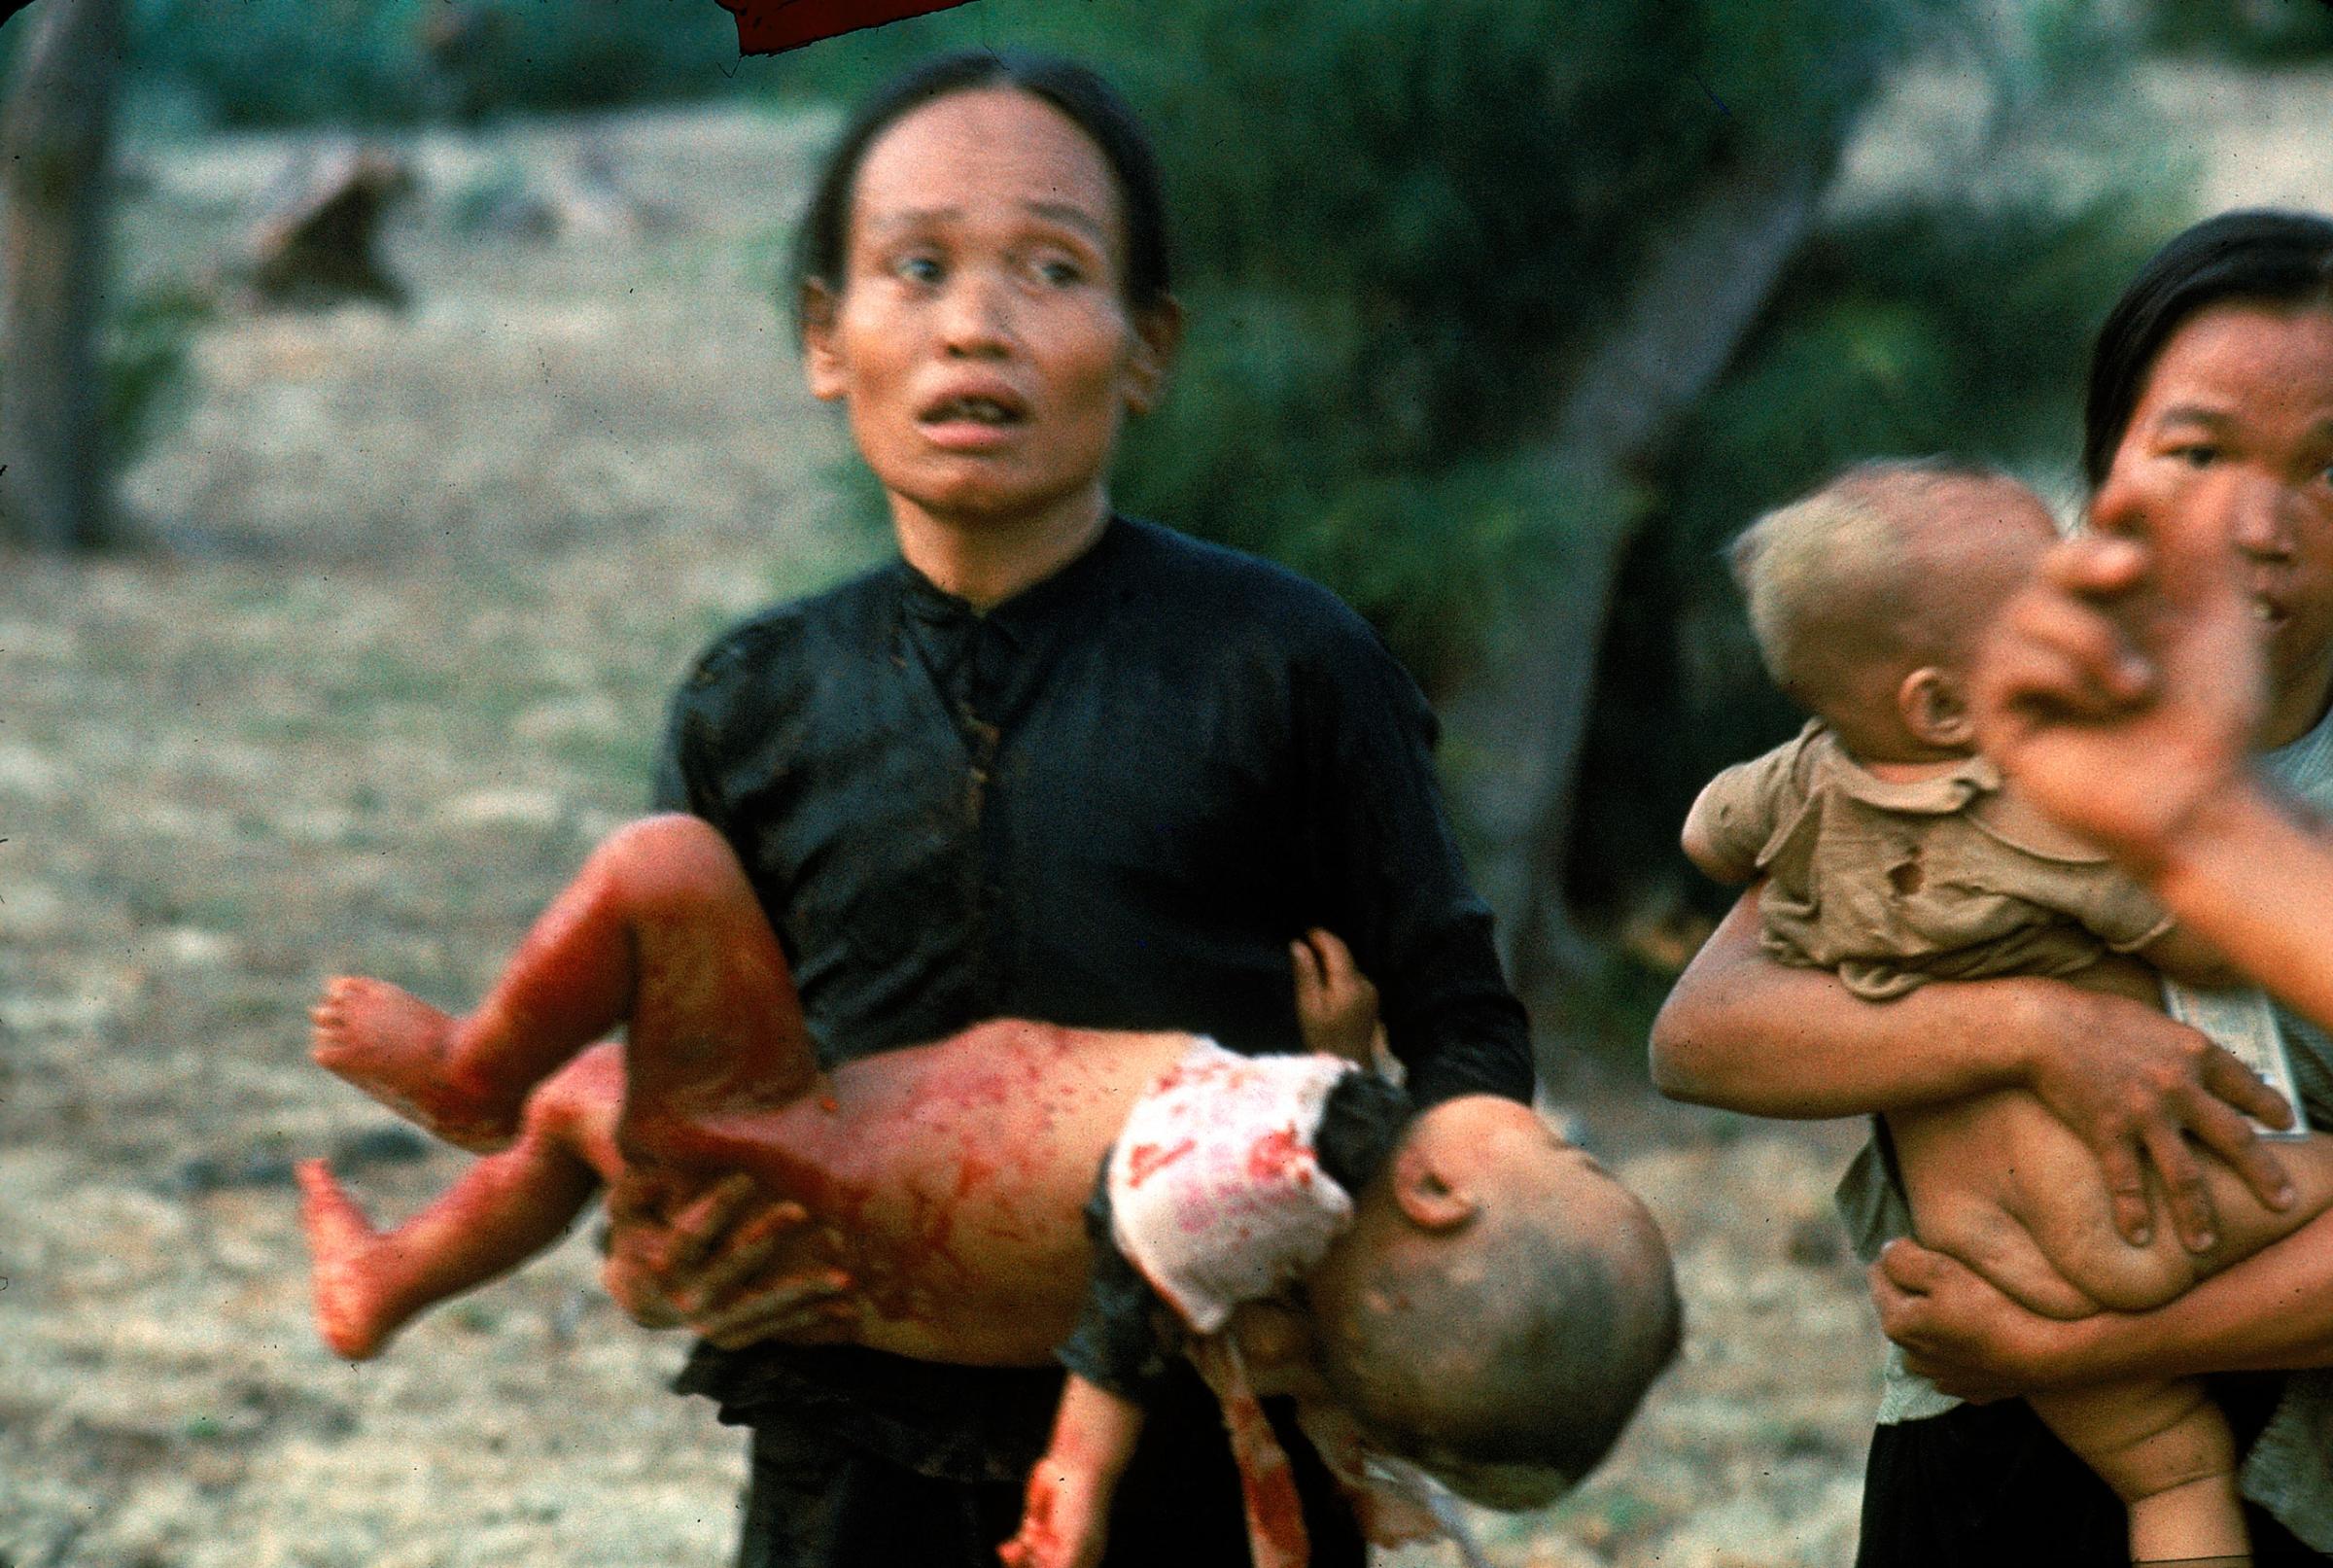 Screaming with terror amid the furious noises of war, a Vietnamese woman clutches her blood-drenched child who was wounded when jets strafed before landing. Before the air strikes, loudspeaker helicopters broadcast warnings, but many villagers were too panicked to follow instructions and evacuate. Distraught, this woman blundered into the thick of the battle.